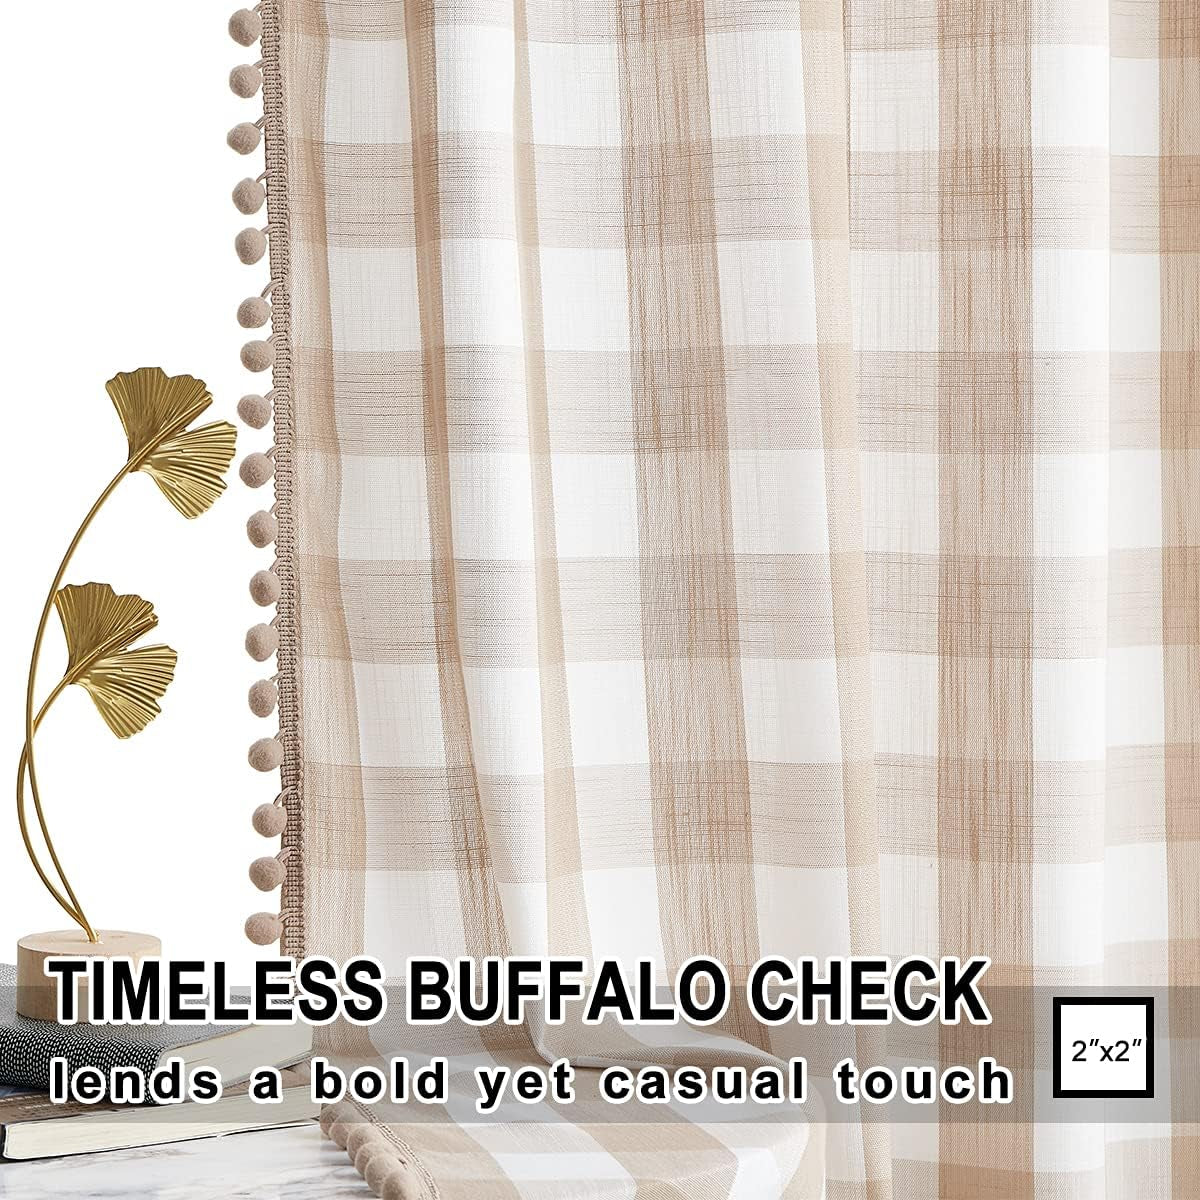 Treatmentex Buffalo Check Curtains 84Inch Farmhouse Pom Pom Drapes for Living Room Vintage Gingham Plaid Semi Sheer Tan Window Curtains for Bedroom Kitchen 2 Panels Rod Pocket Taupe and White  Natural Decoratex   